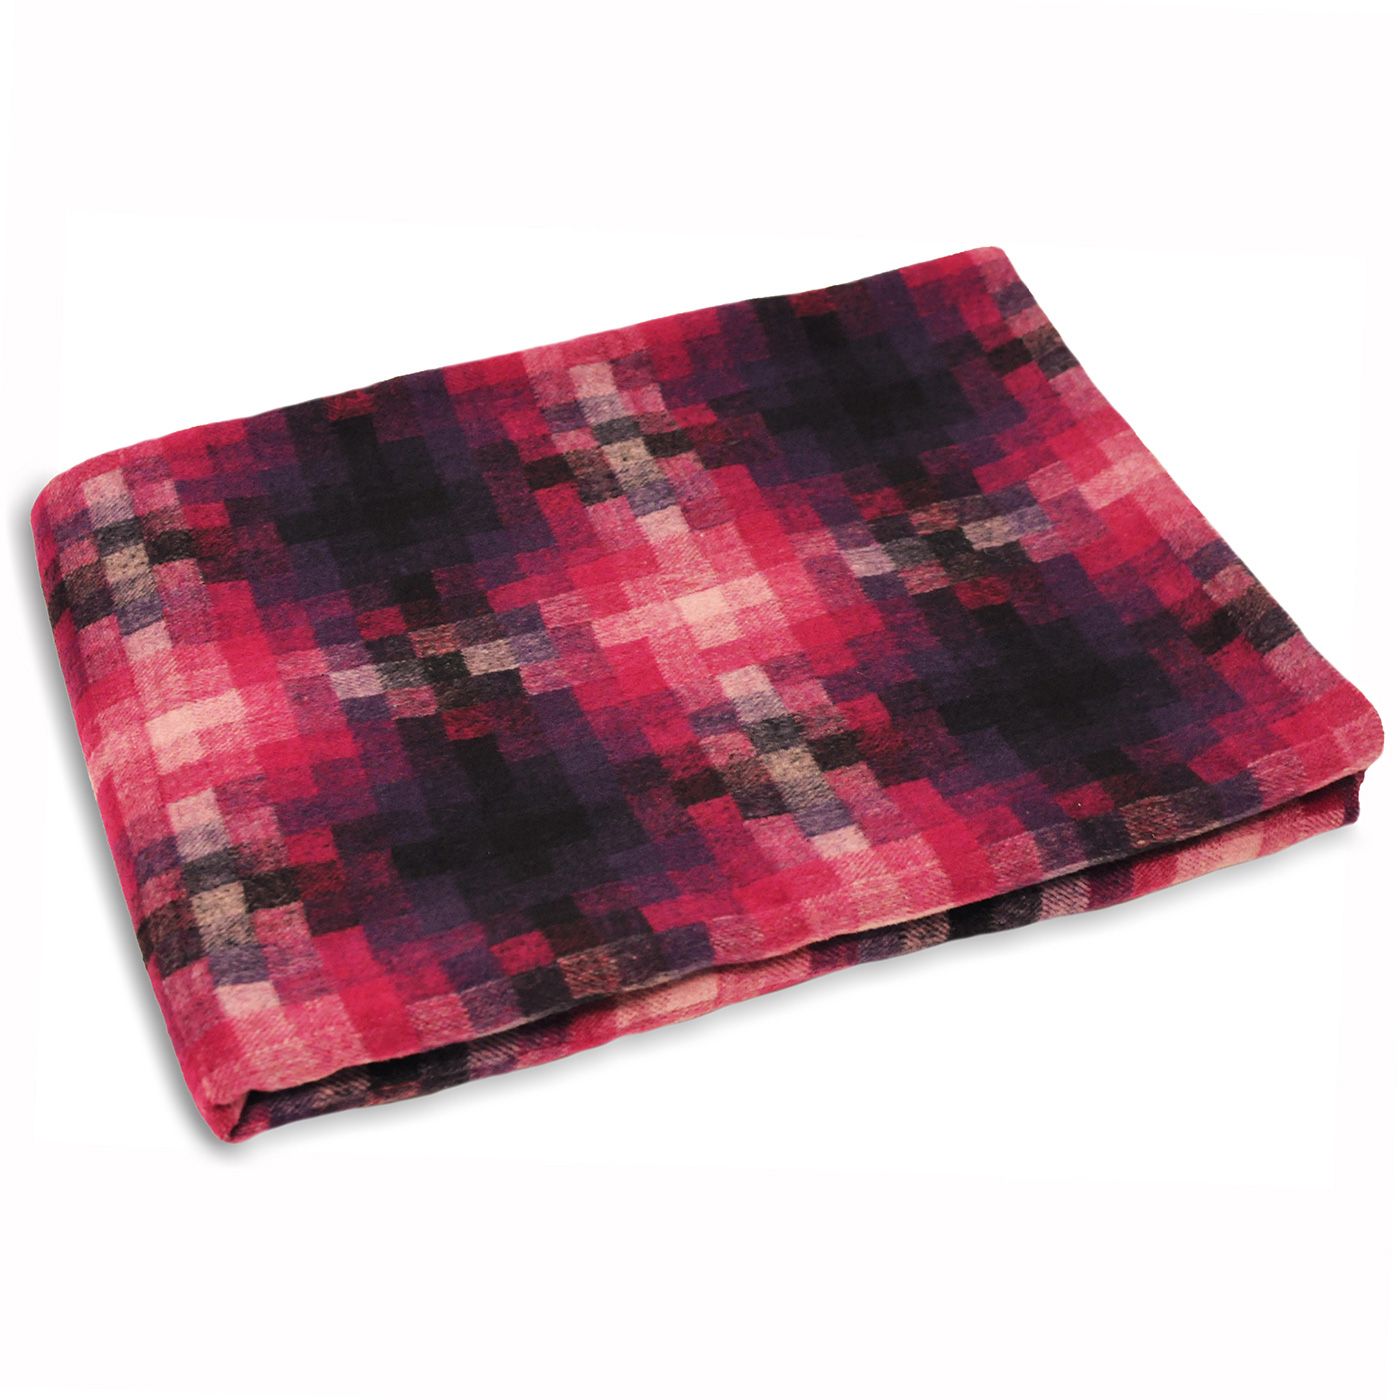 Jam-packed with retro style, the intoxicating Pixel throw comes with a funkily bright colour scheme that weaves its way through the fabric, creating a dazzling display. Featuring an abstract, pixelated design, the throw is made from a wool-like material, making it a comfortable feature piece in your room on your sofa or bed. To keep this throw vibrant dry clean only. Iron on a cool setting for the best results.